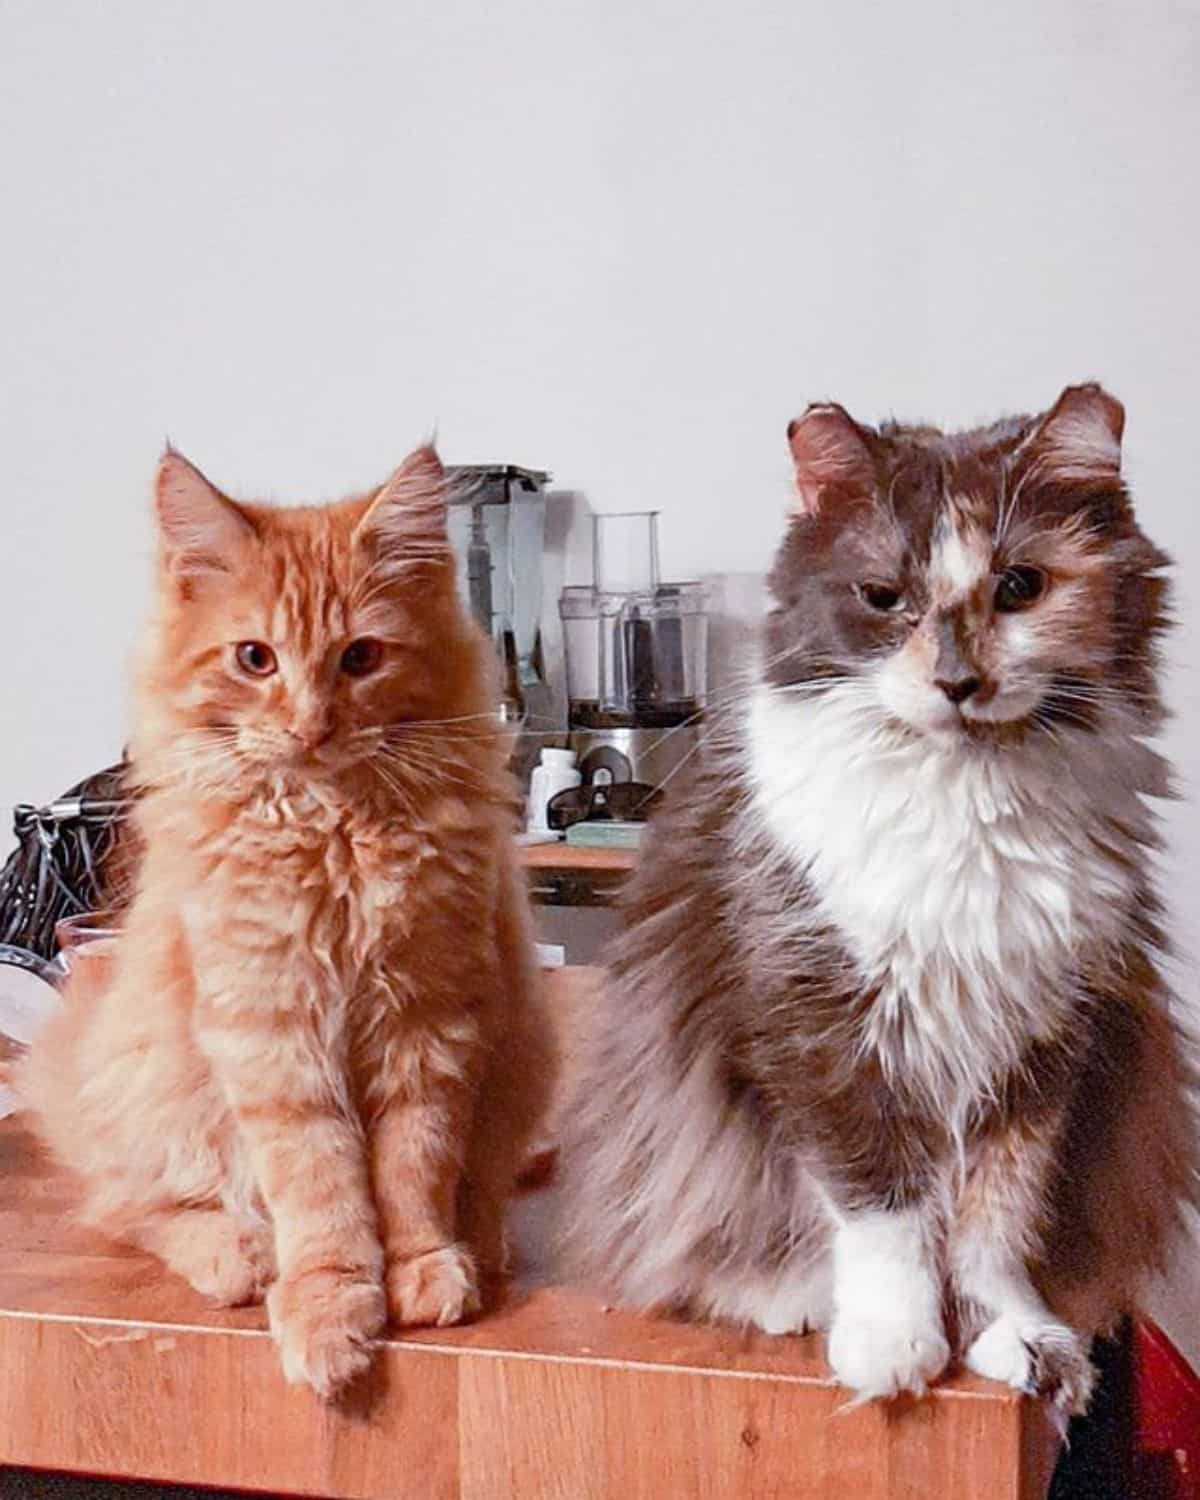 Two fluffy maine coons sitting on a wooden table.